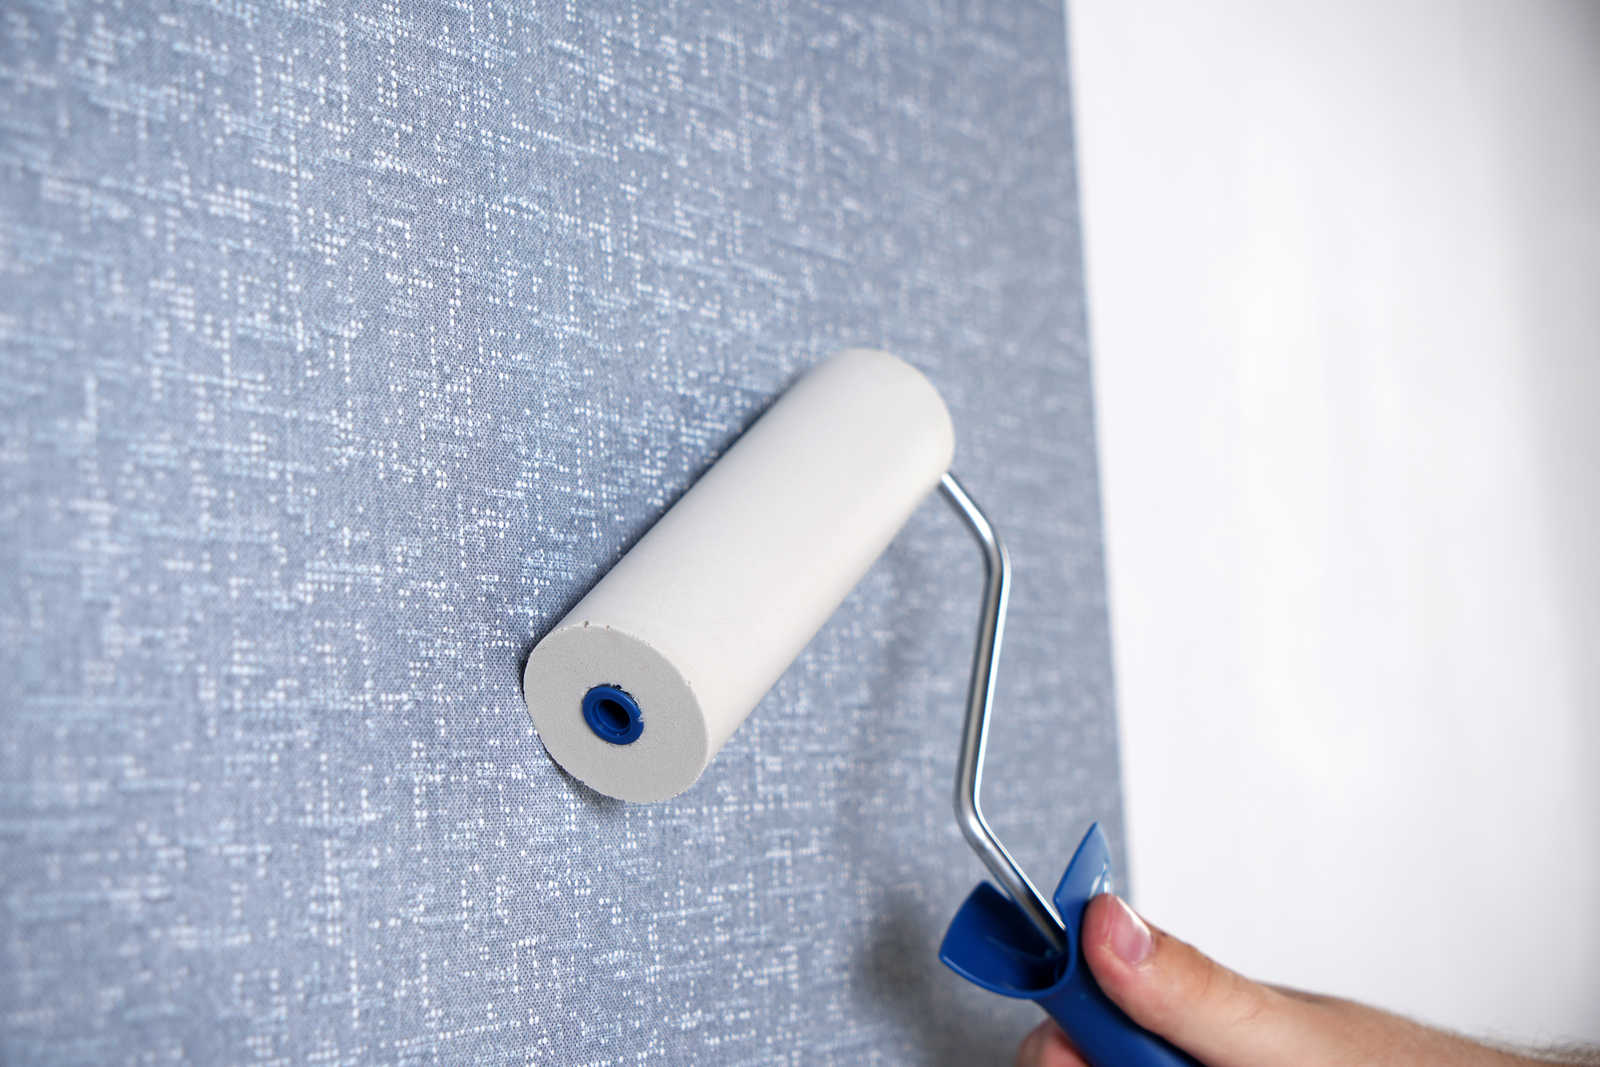             A.S. Création Wallcovering tool Tapezierzubehör
        